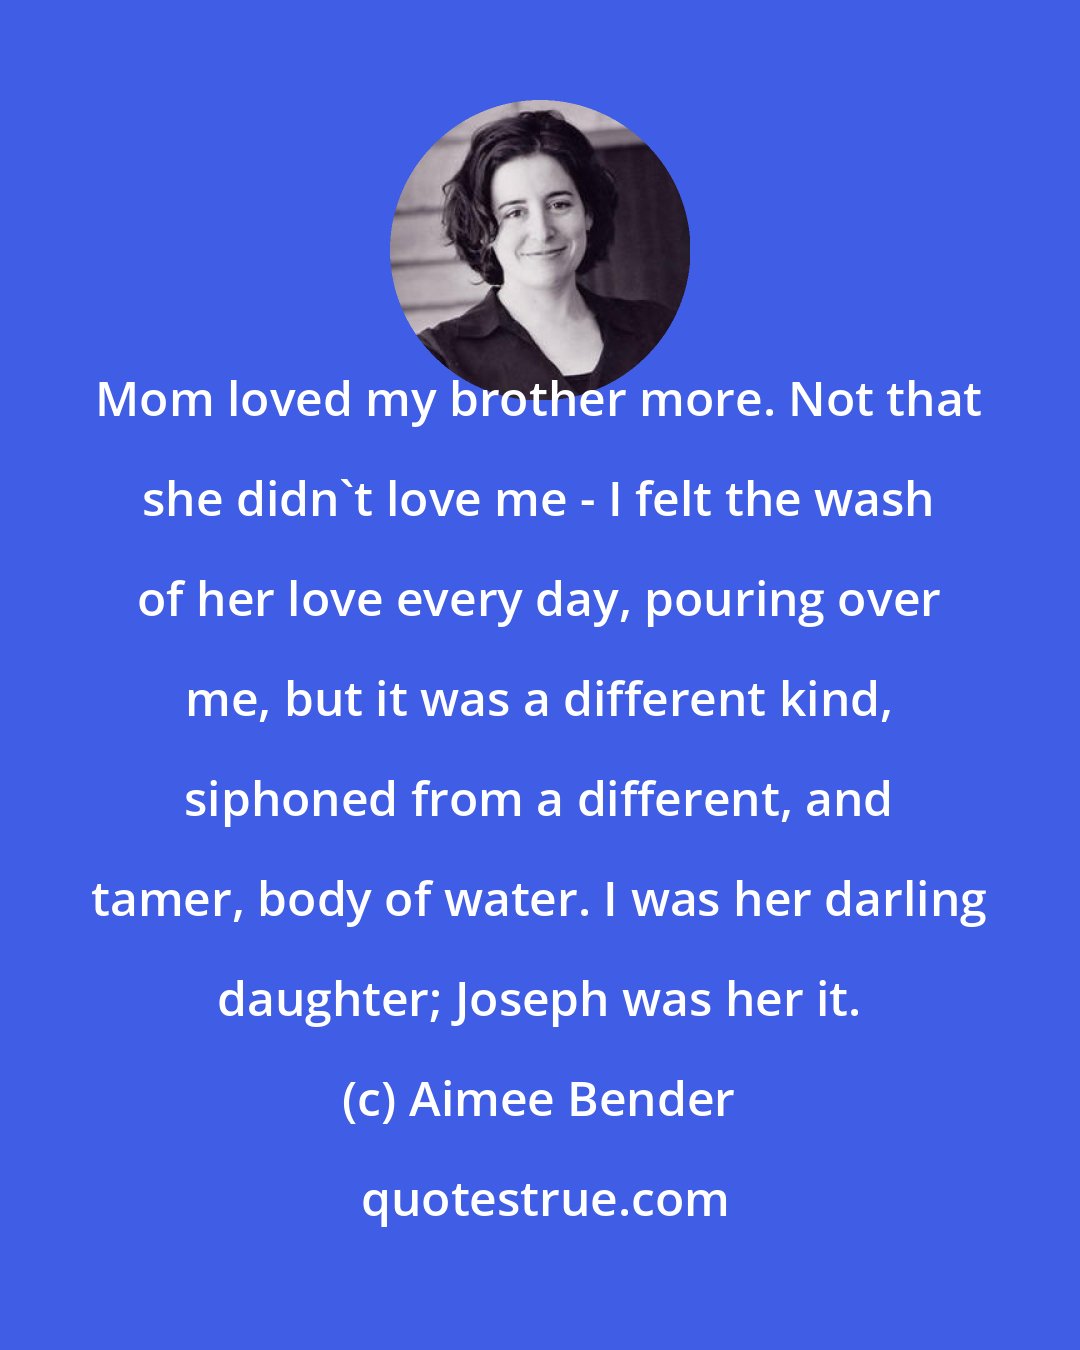 Aimee Bender: Mom loved my brother more. Not that she didn't love me - I felt the wash of her love every day, pouring over me, but it was a different kind, siphoned from a different, and tamer, body of water. I was her darling daughter; Joseph was her it.